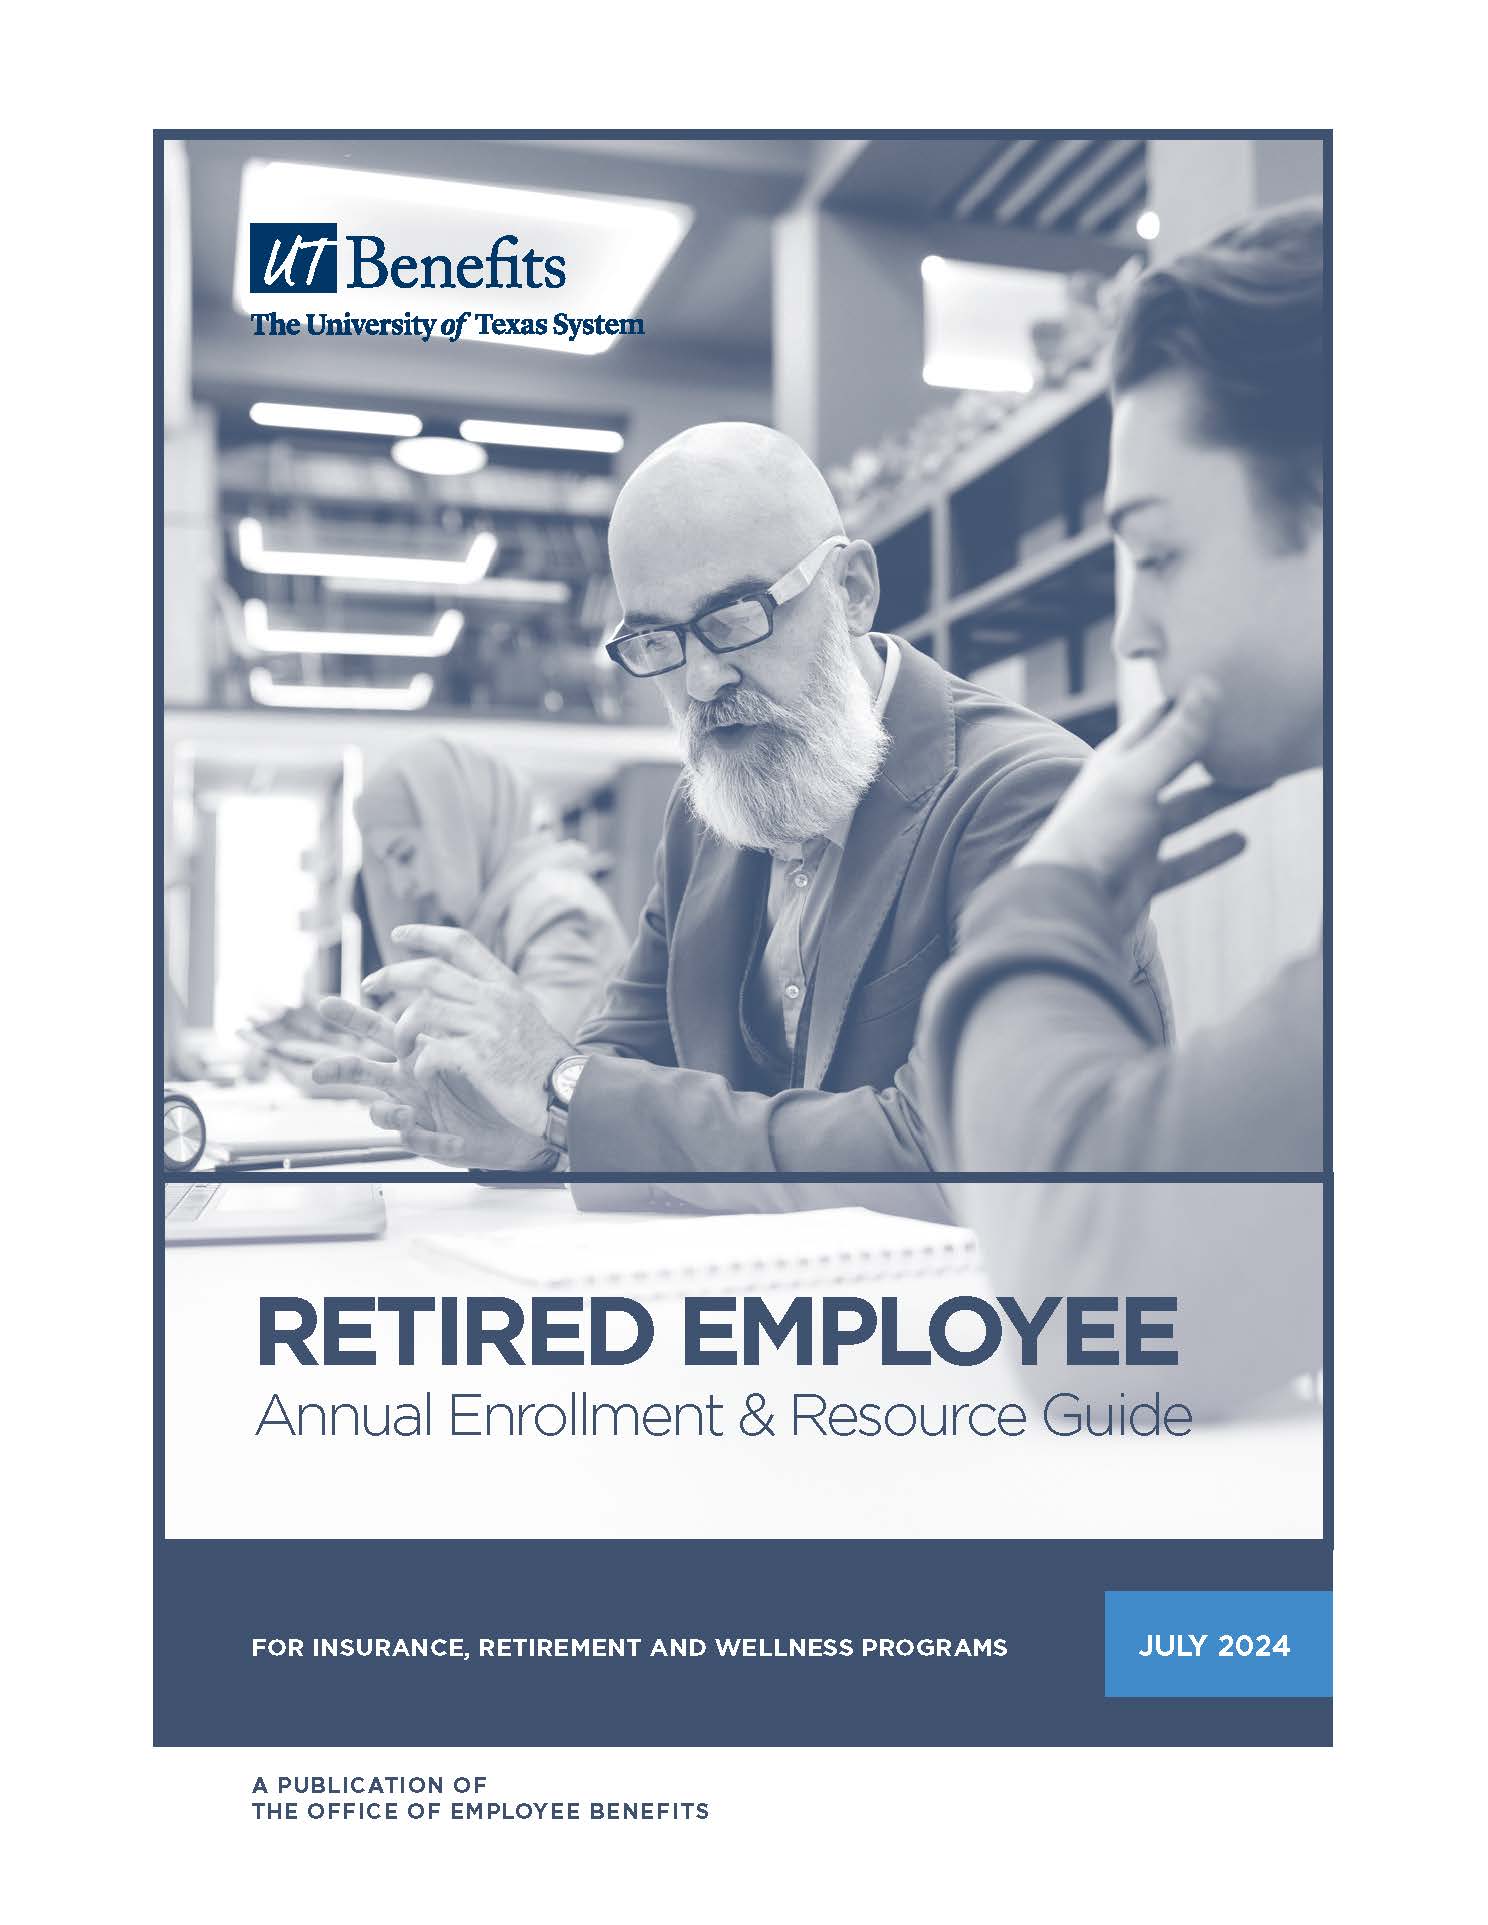 2024 Annual Enrollment & Resource Guide for Retired Employees